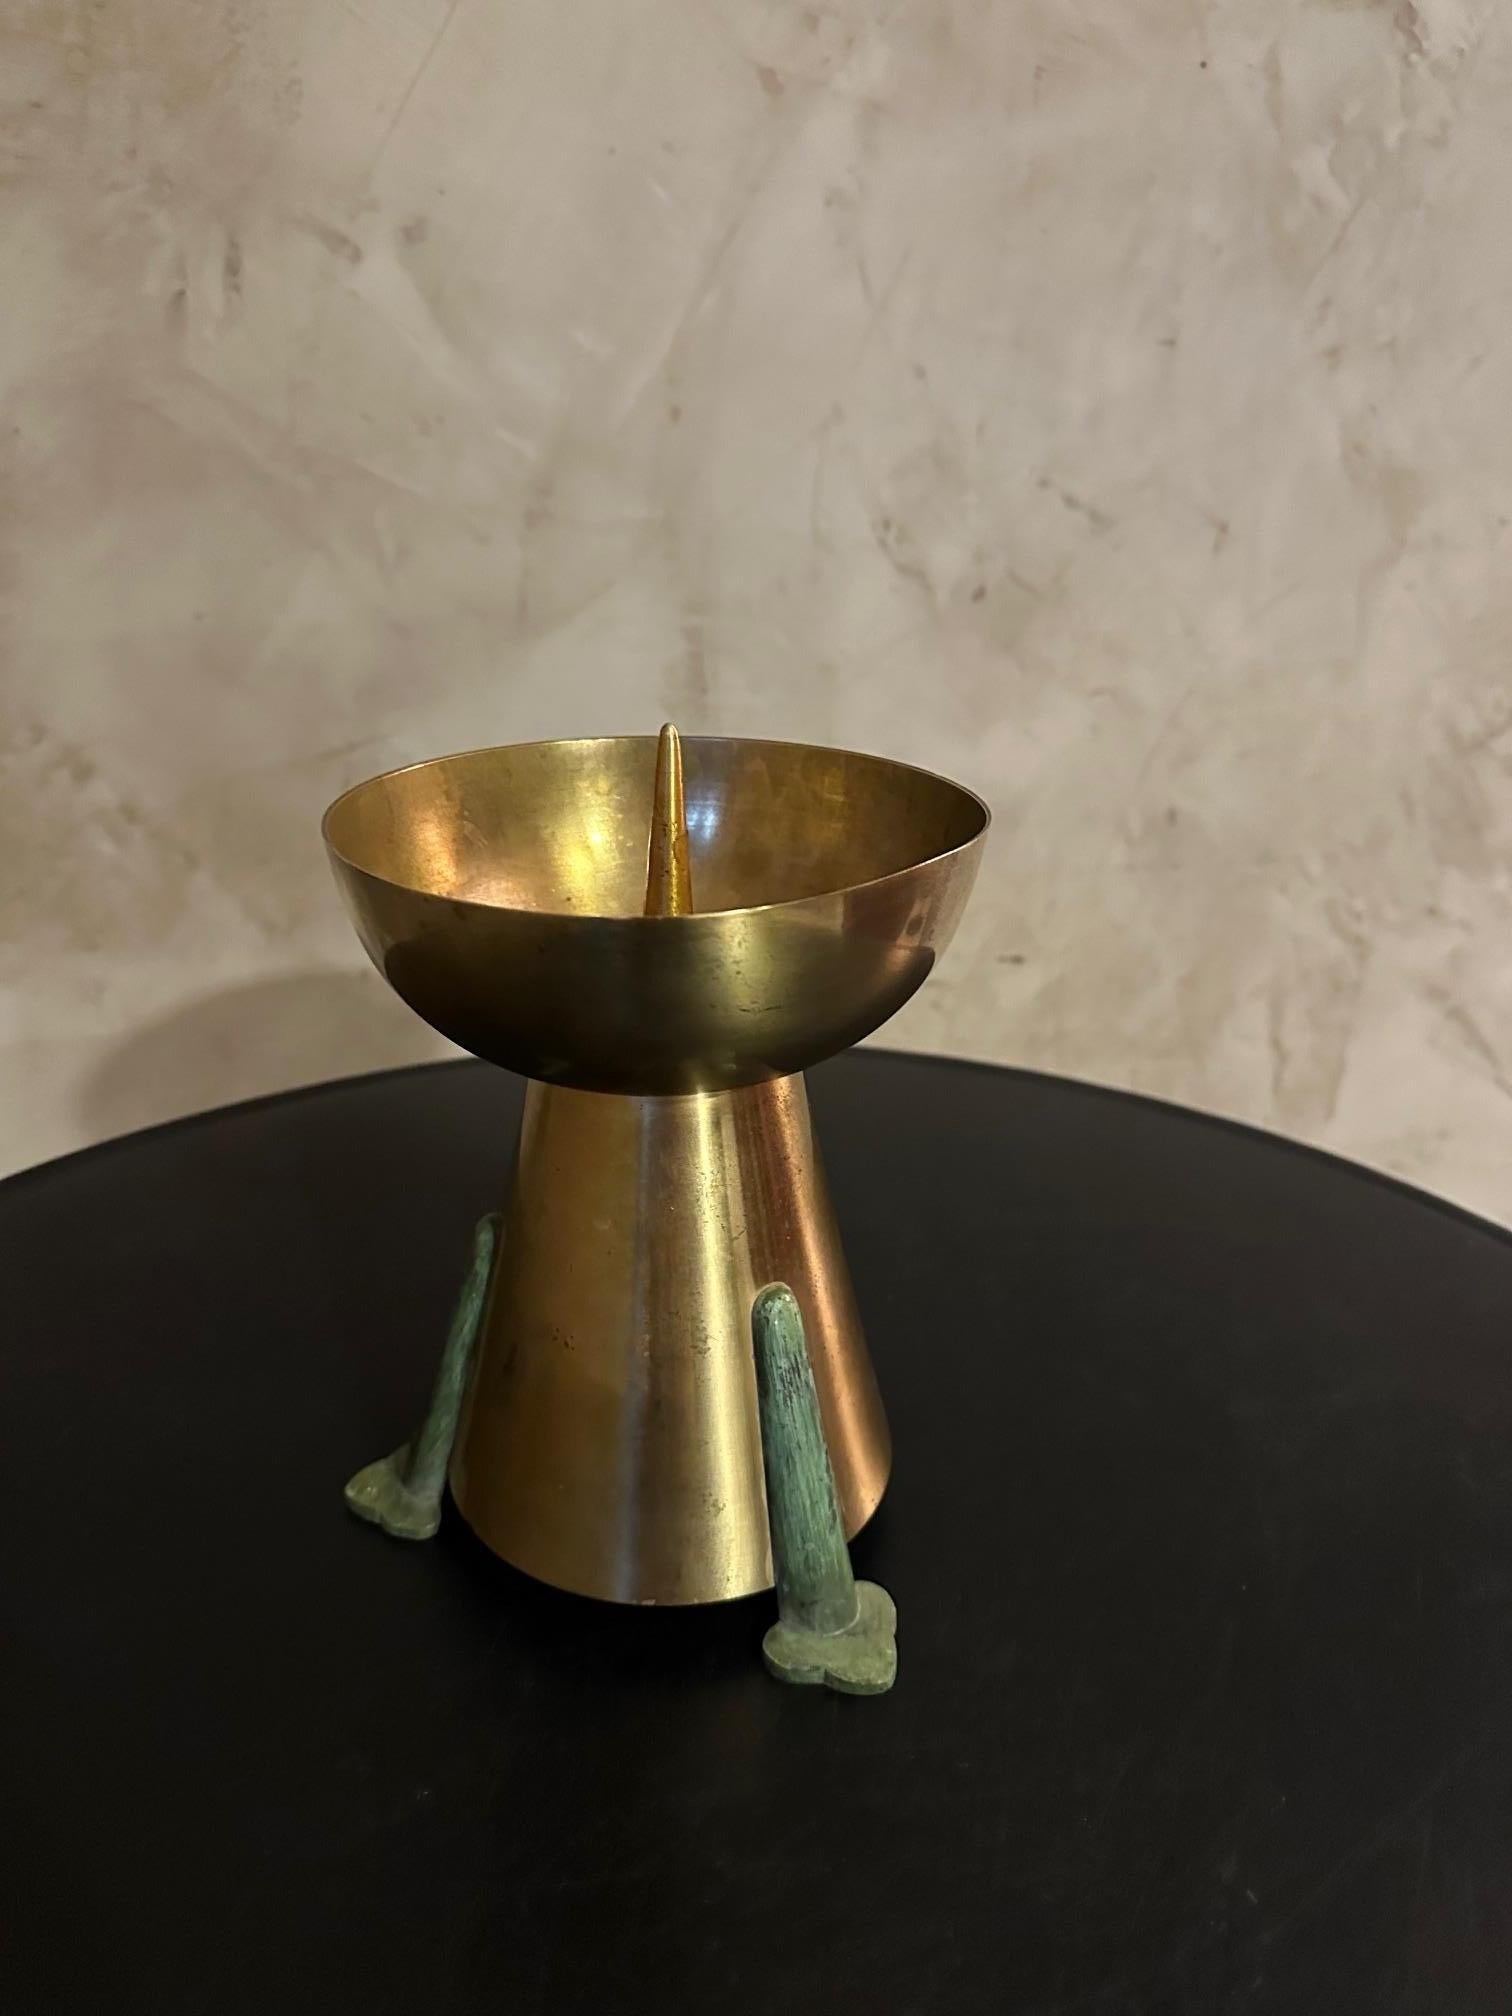 Candle stick in brass and metal dating from the 1950s with a tripod base.
Very good condition. 